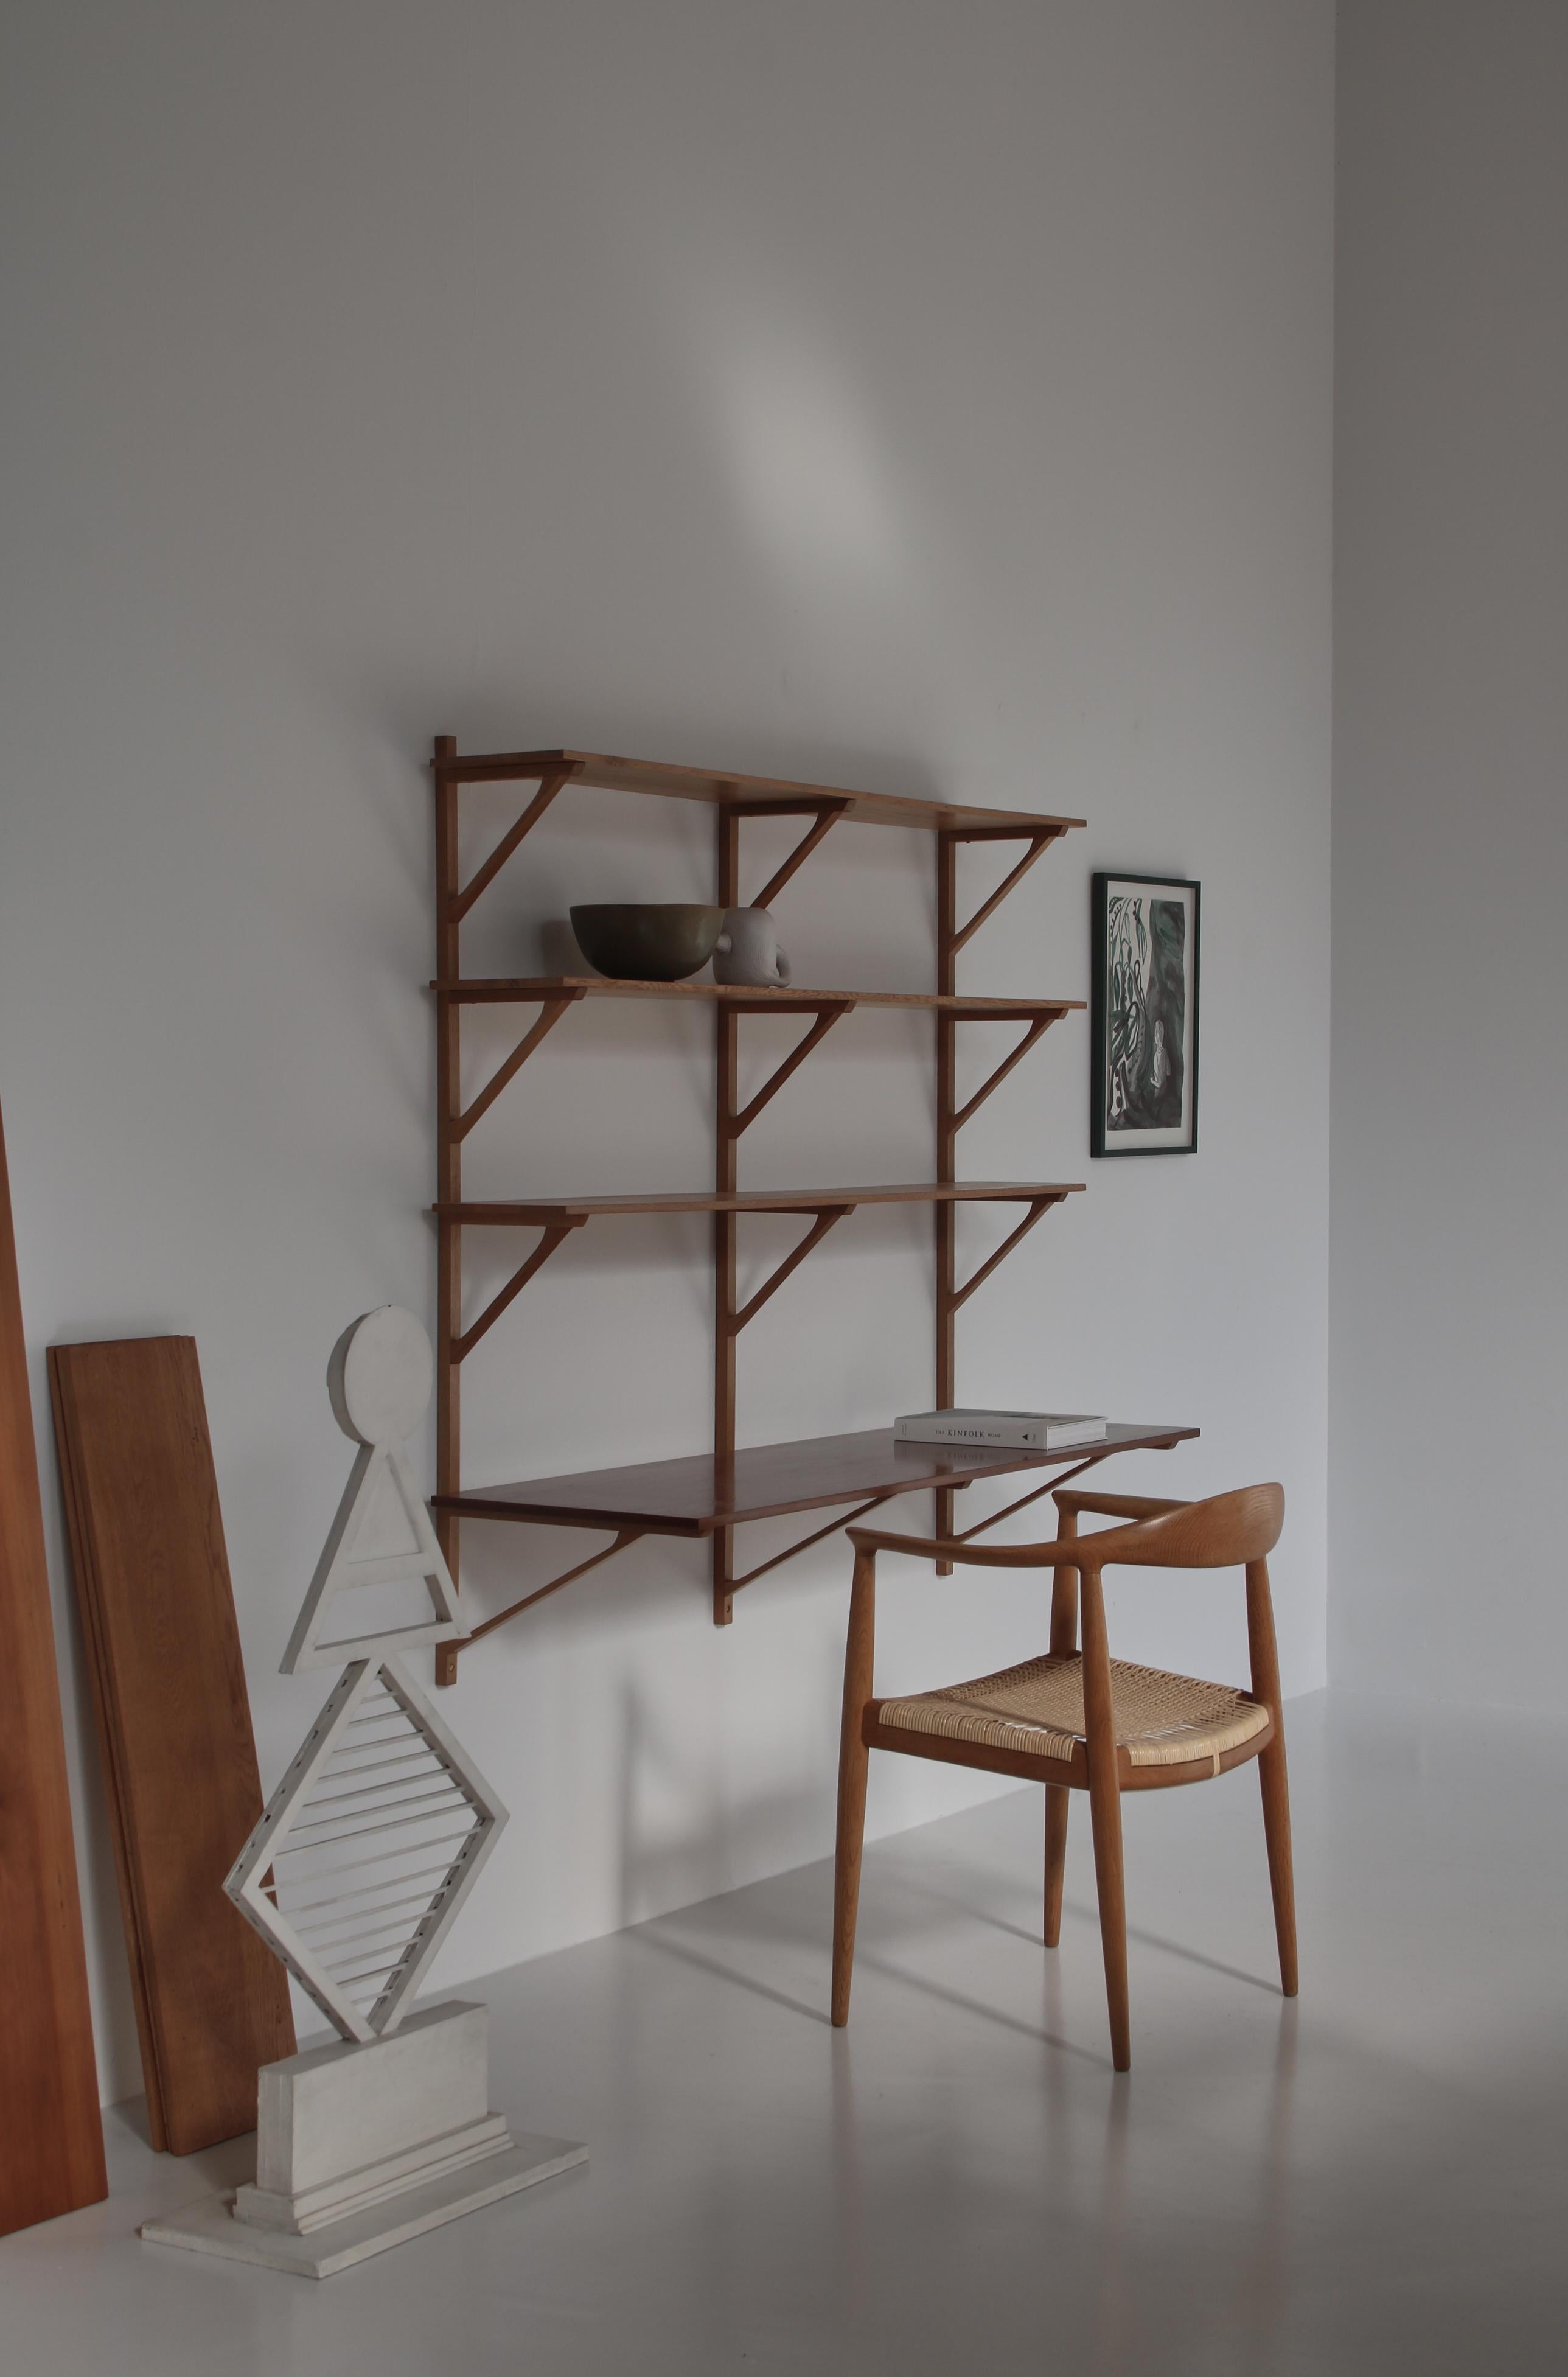 Important large wall shelving system in oak and teakwood designed by Børge Mogensen in 1956. This rare and early edition was made at cabinetmaker Erhard Rasmussen before the production was taken over by Fredericia Stolefabrik.

The three top